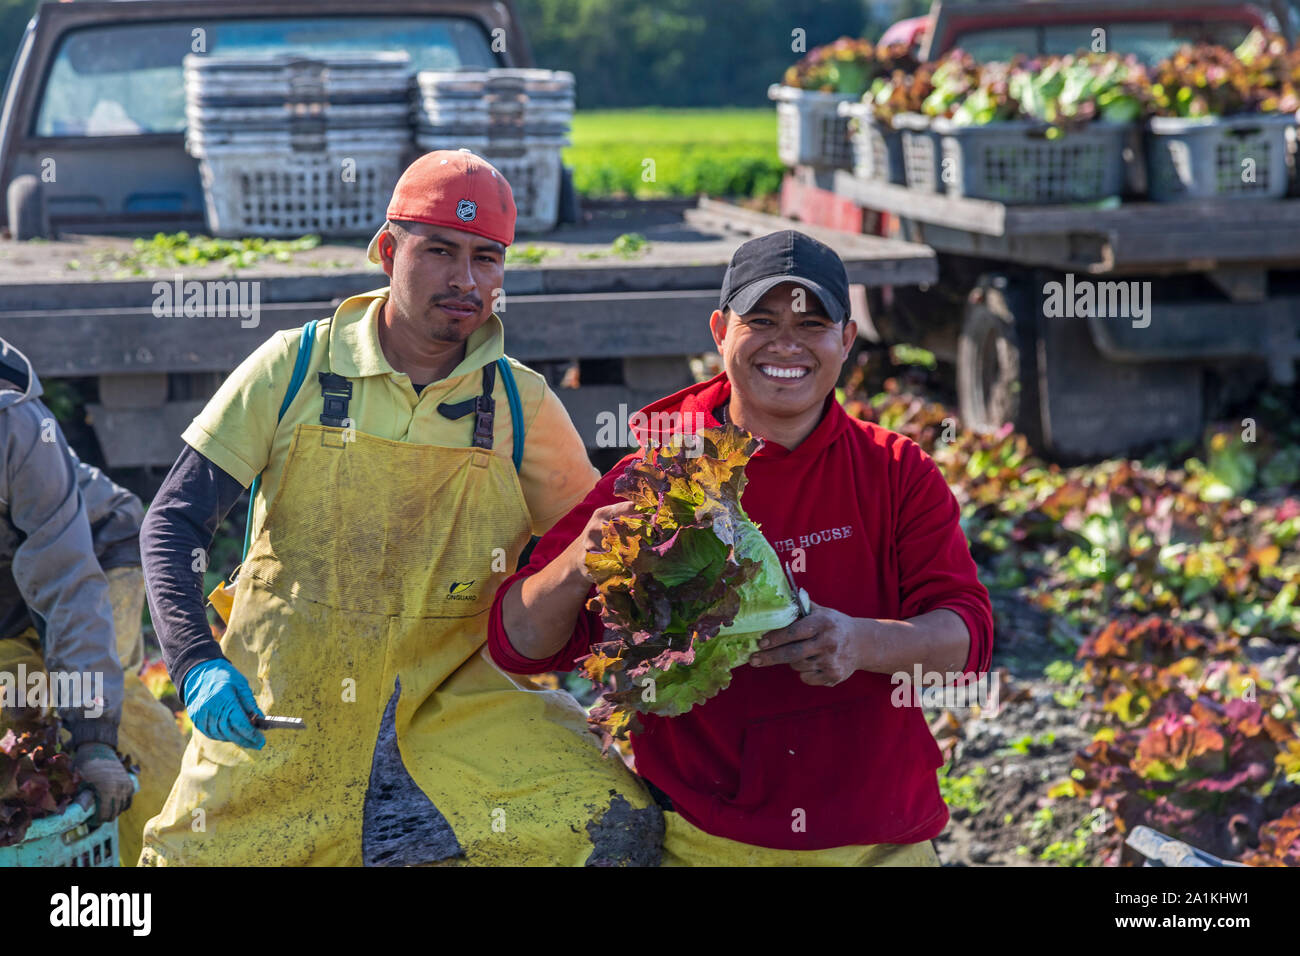 Hudsonville, Michigan - Workers harvest red leaf lettuce from a field in west Michigan. Stock Photo